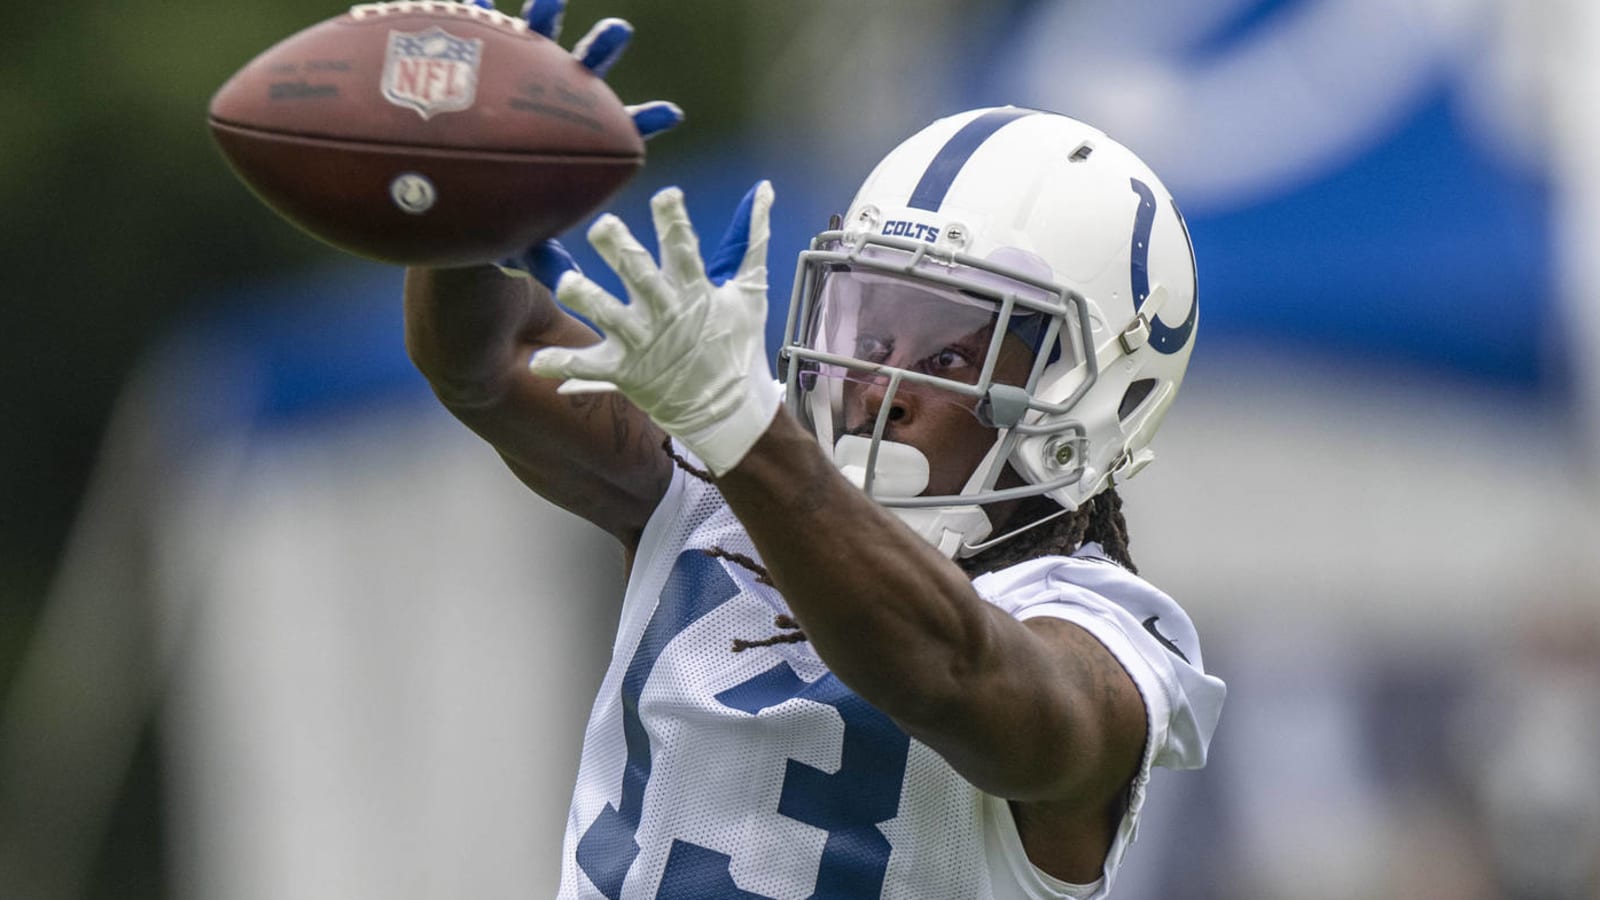 Colts activate WR T.Y. Hilton from IR